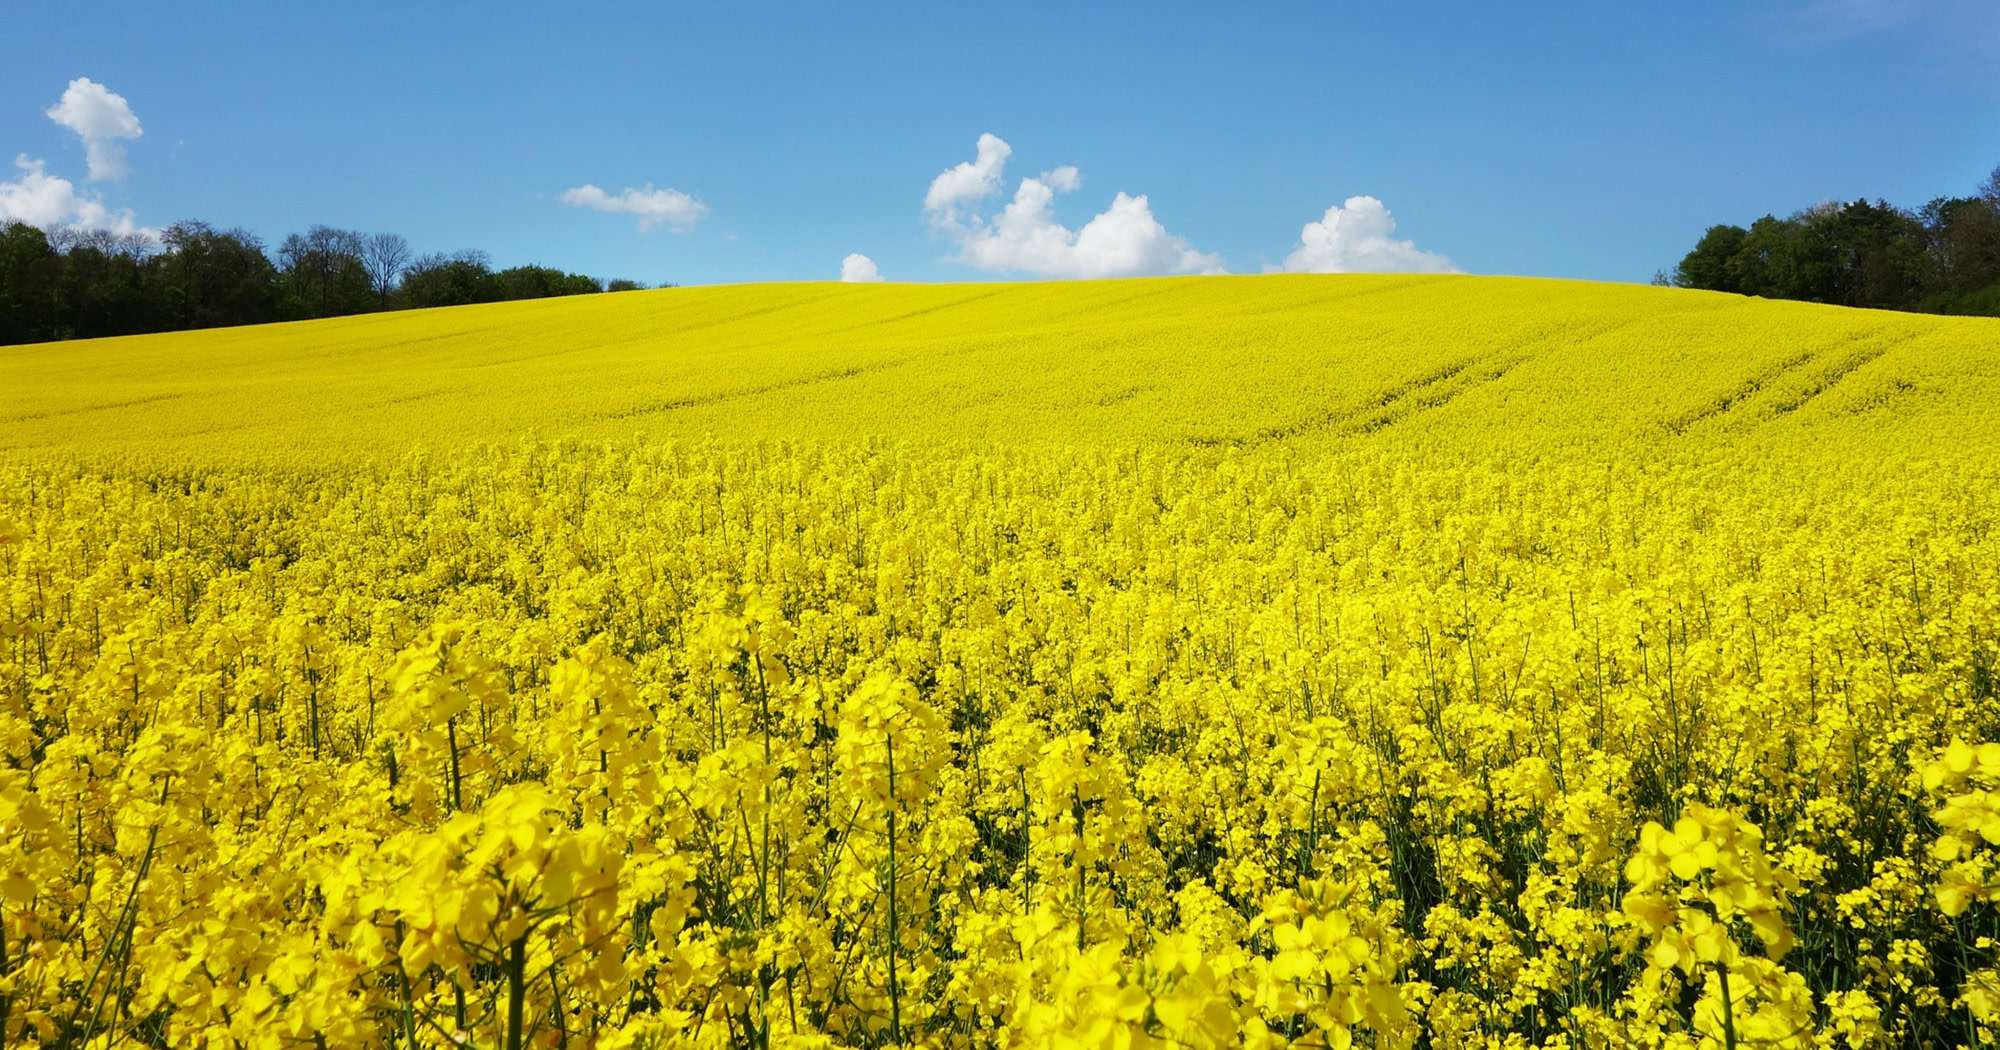 EPA Says Canola Oil can be Used as Feedstock for Renewable Diesel